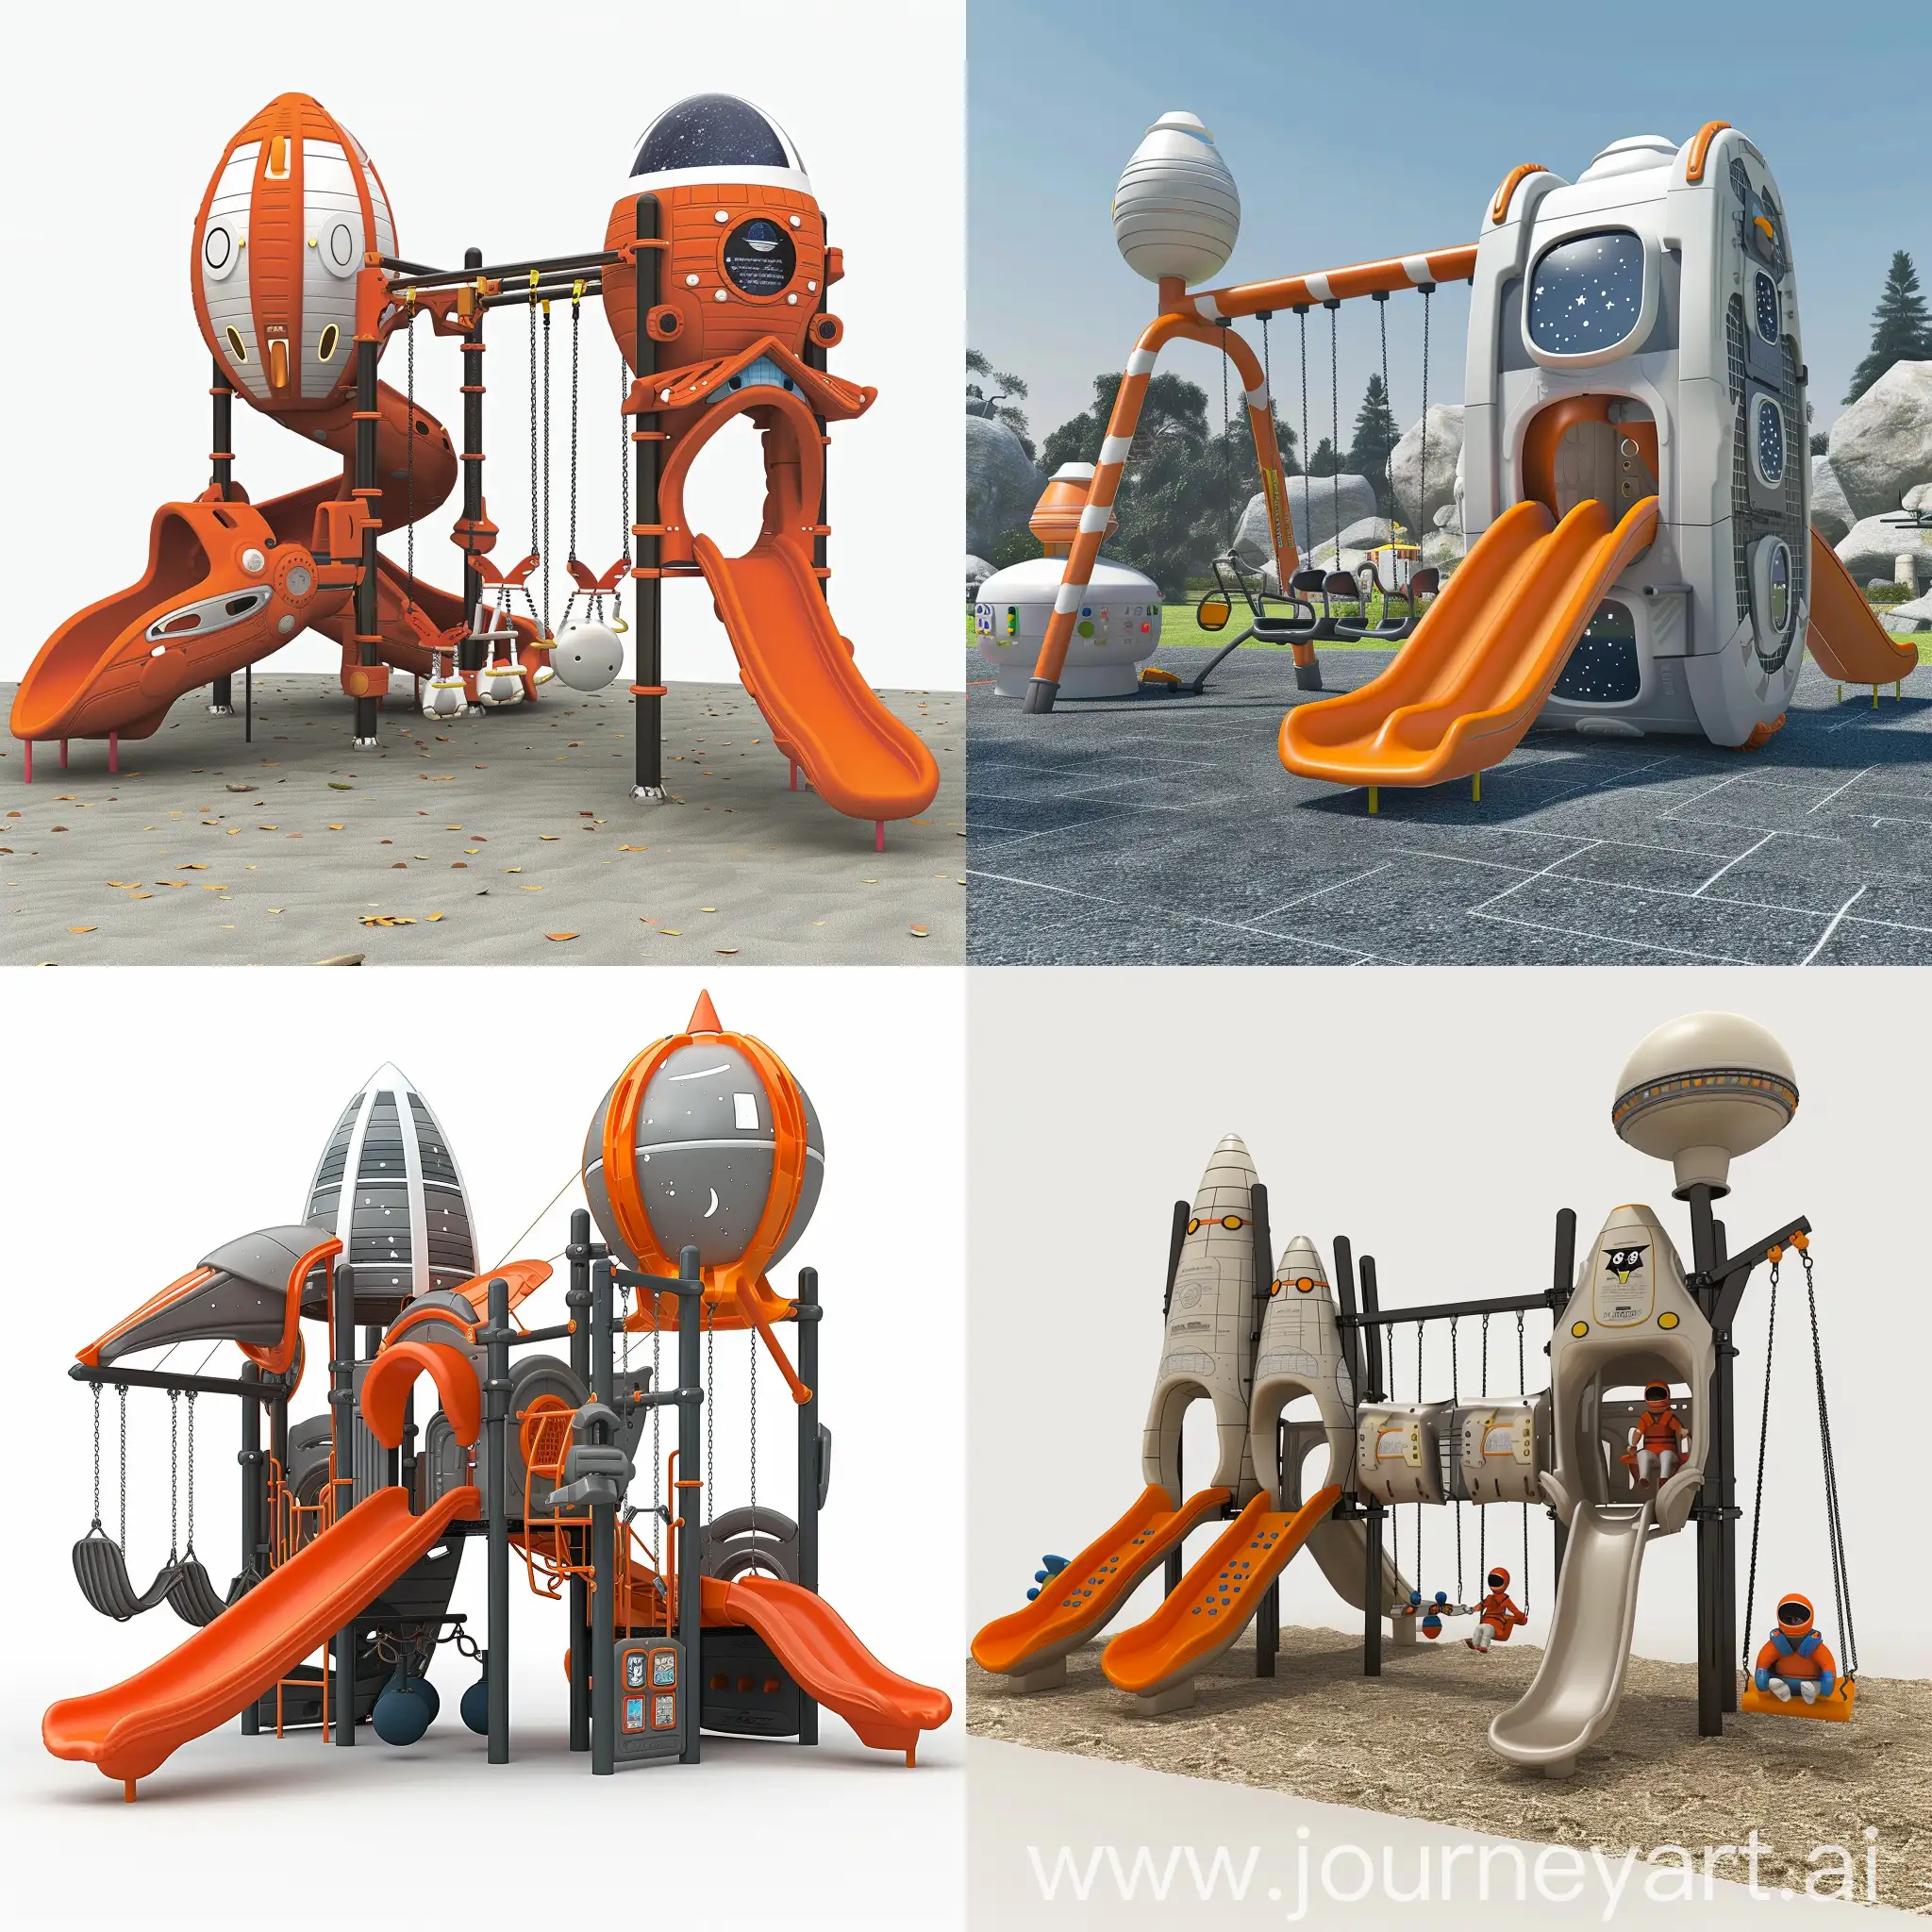 Futuristic-SpaceThemed-Childrens-Playground-with-Slide-Swings-and-Monkey-Bars